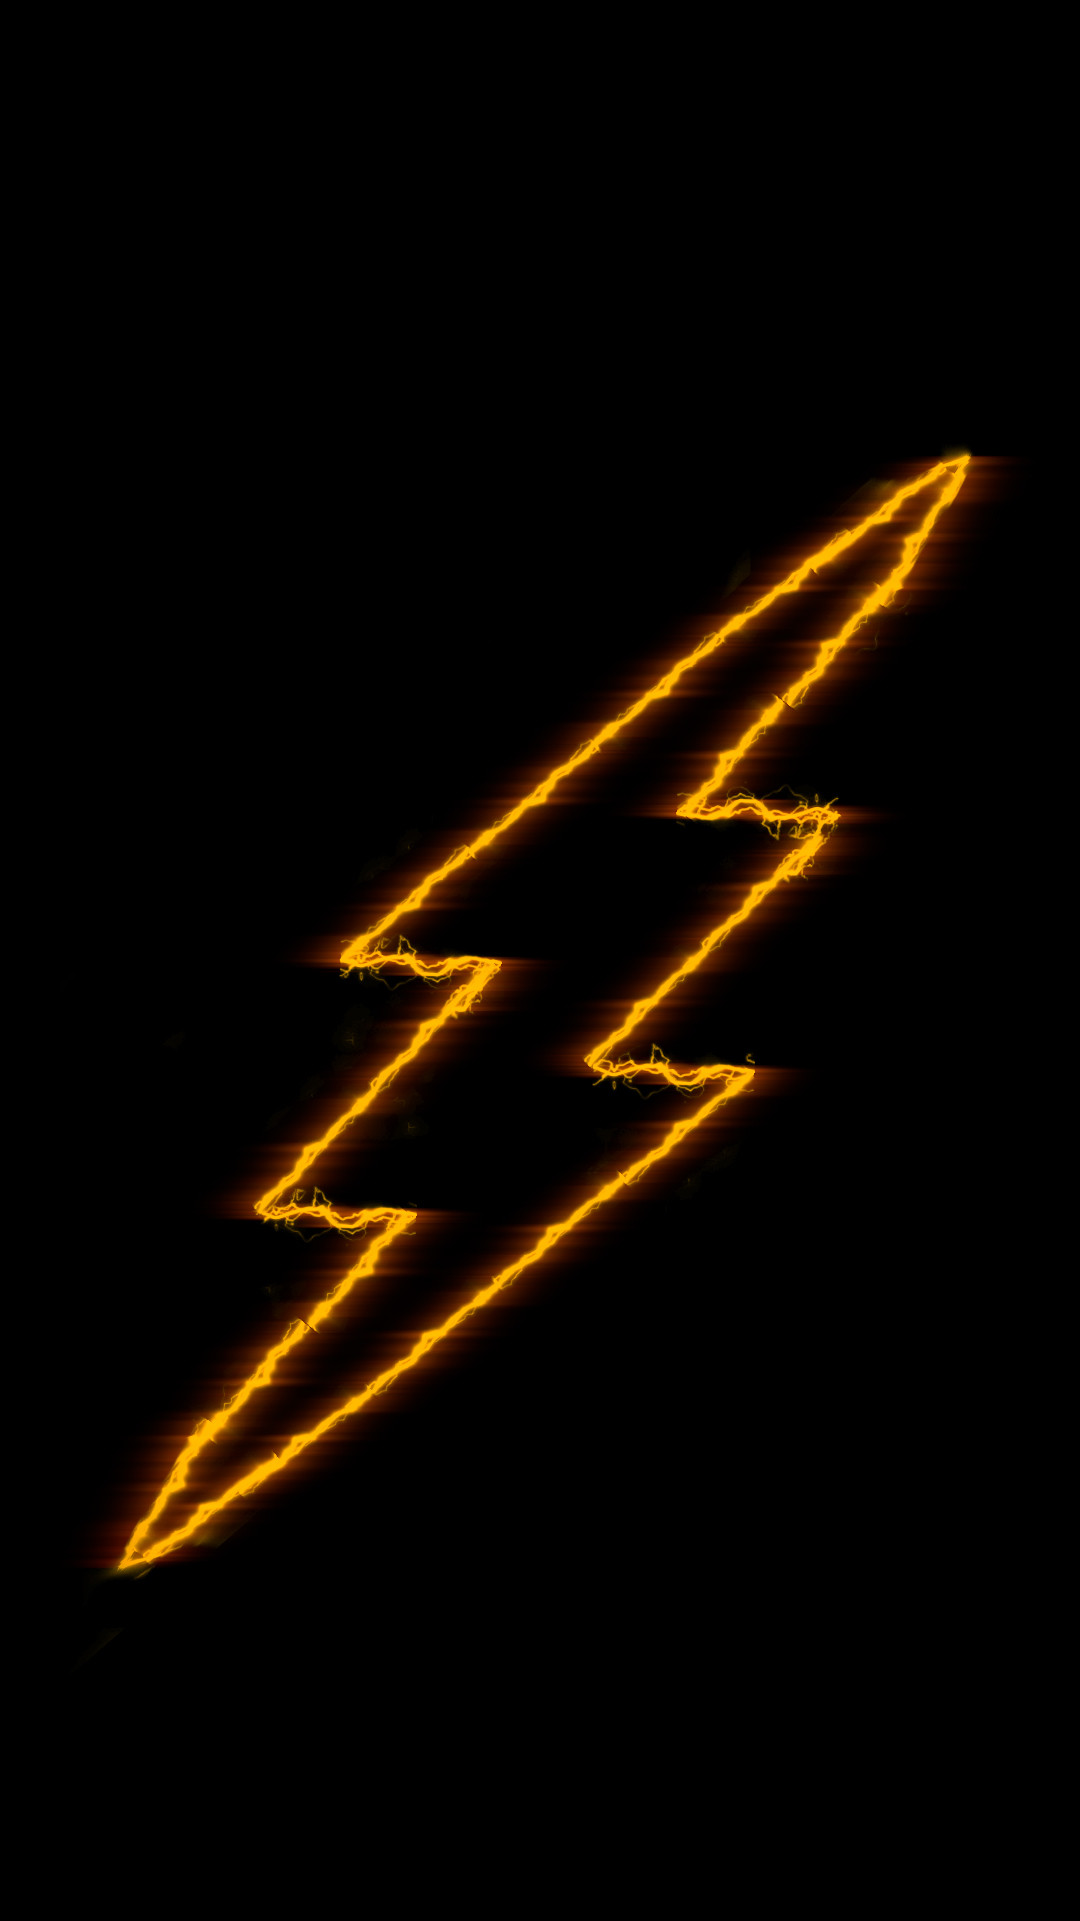 The Flash Logo Wallpaper Free Custom Made iPhone wallpaper. Not for reupload unless this page is linked